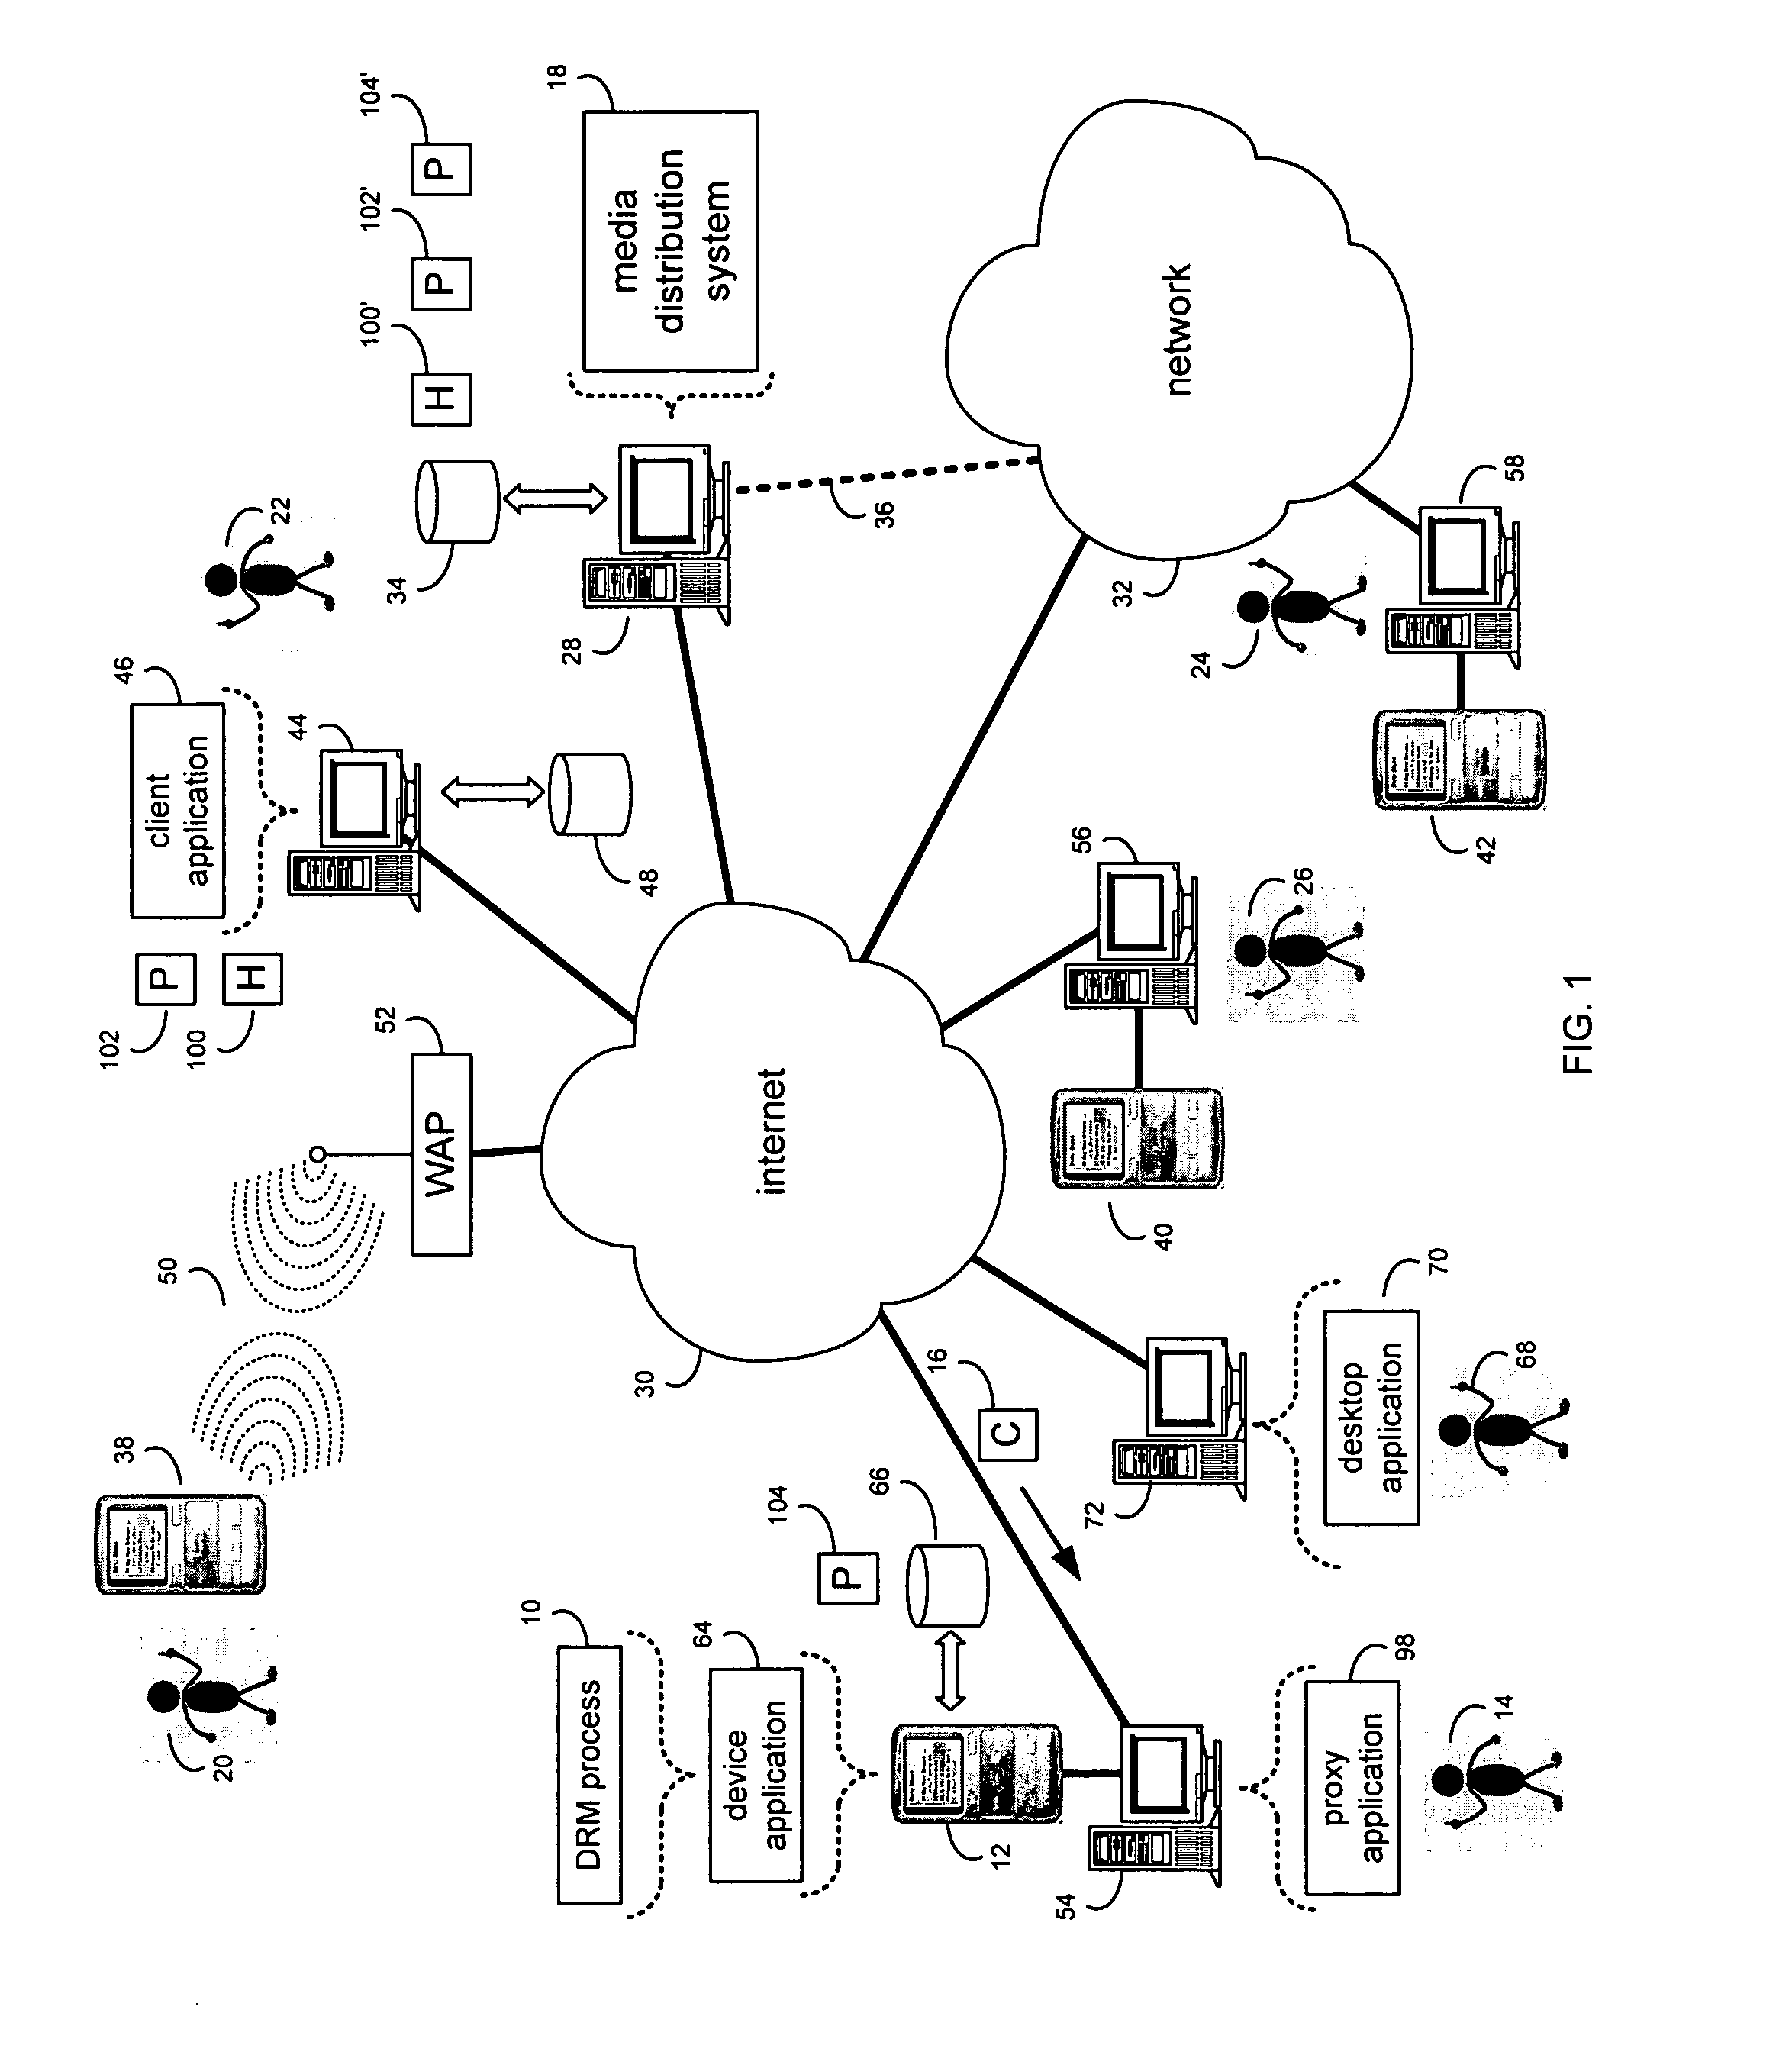 System and method for transferring playlists